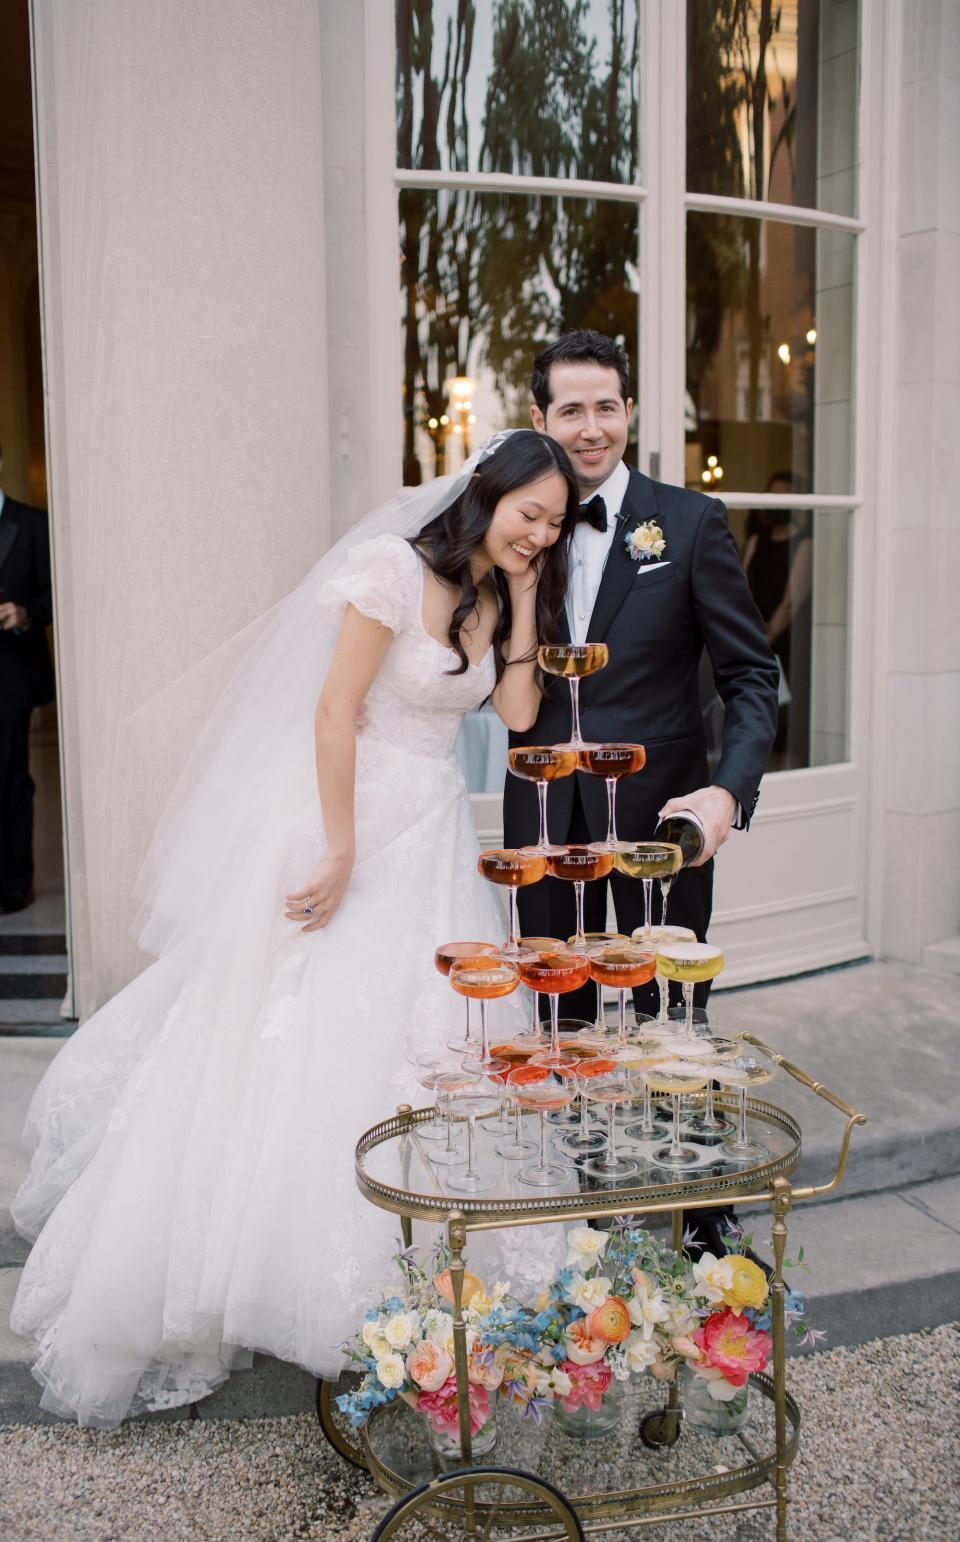 A bride and groom lean together in front of a champagne tower.